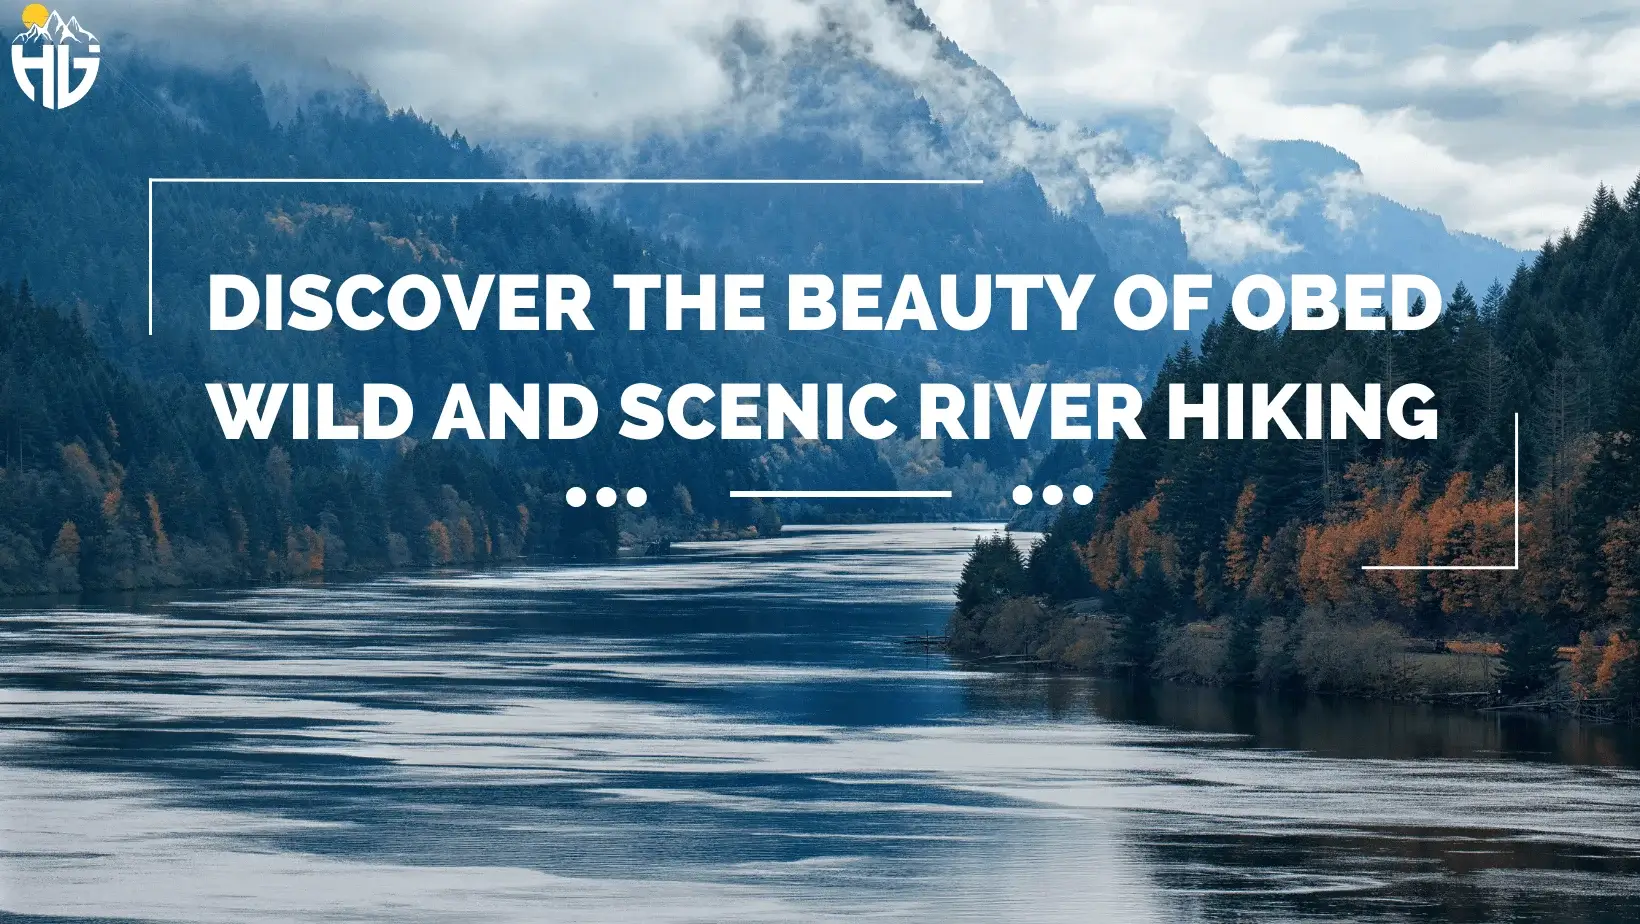 Discover the Beauty of Obed Wild and Scenic River Hiking